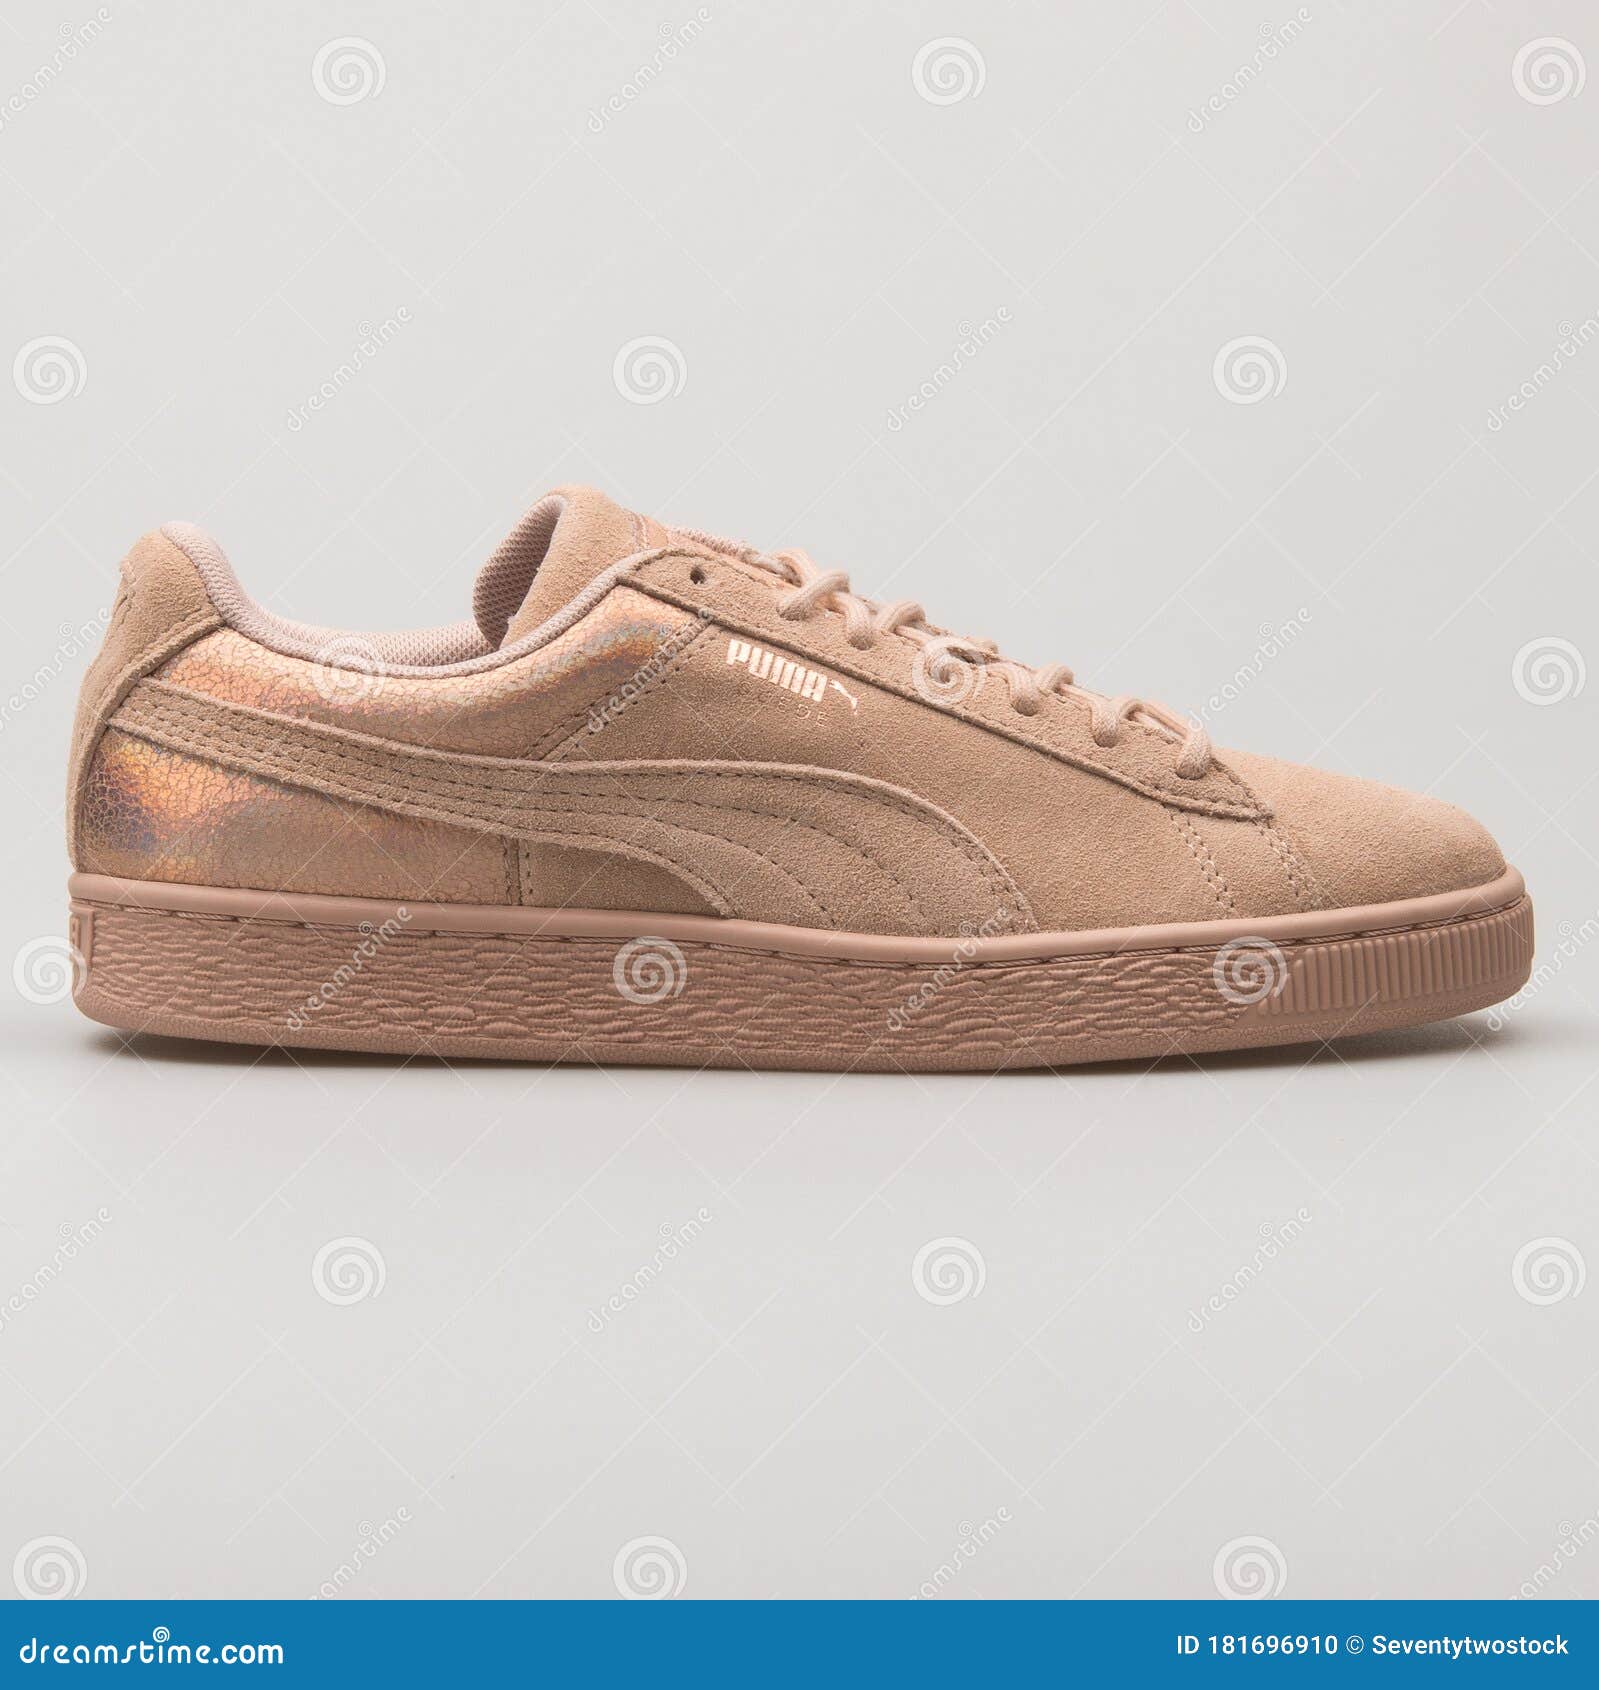 the first Stubborn hand in Puma Suede Luna Lux Rose Sneaker Editorial Image - Image of sole, laces:  181696910